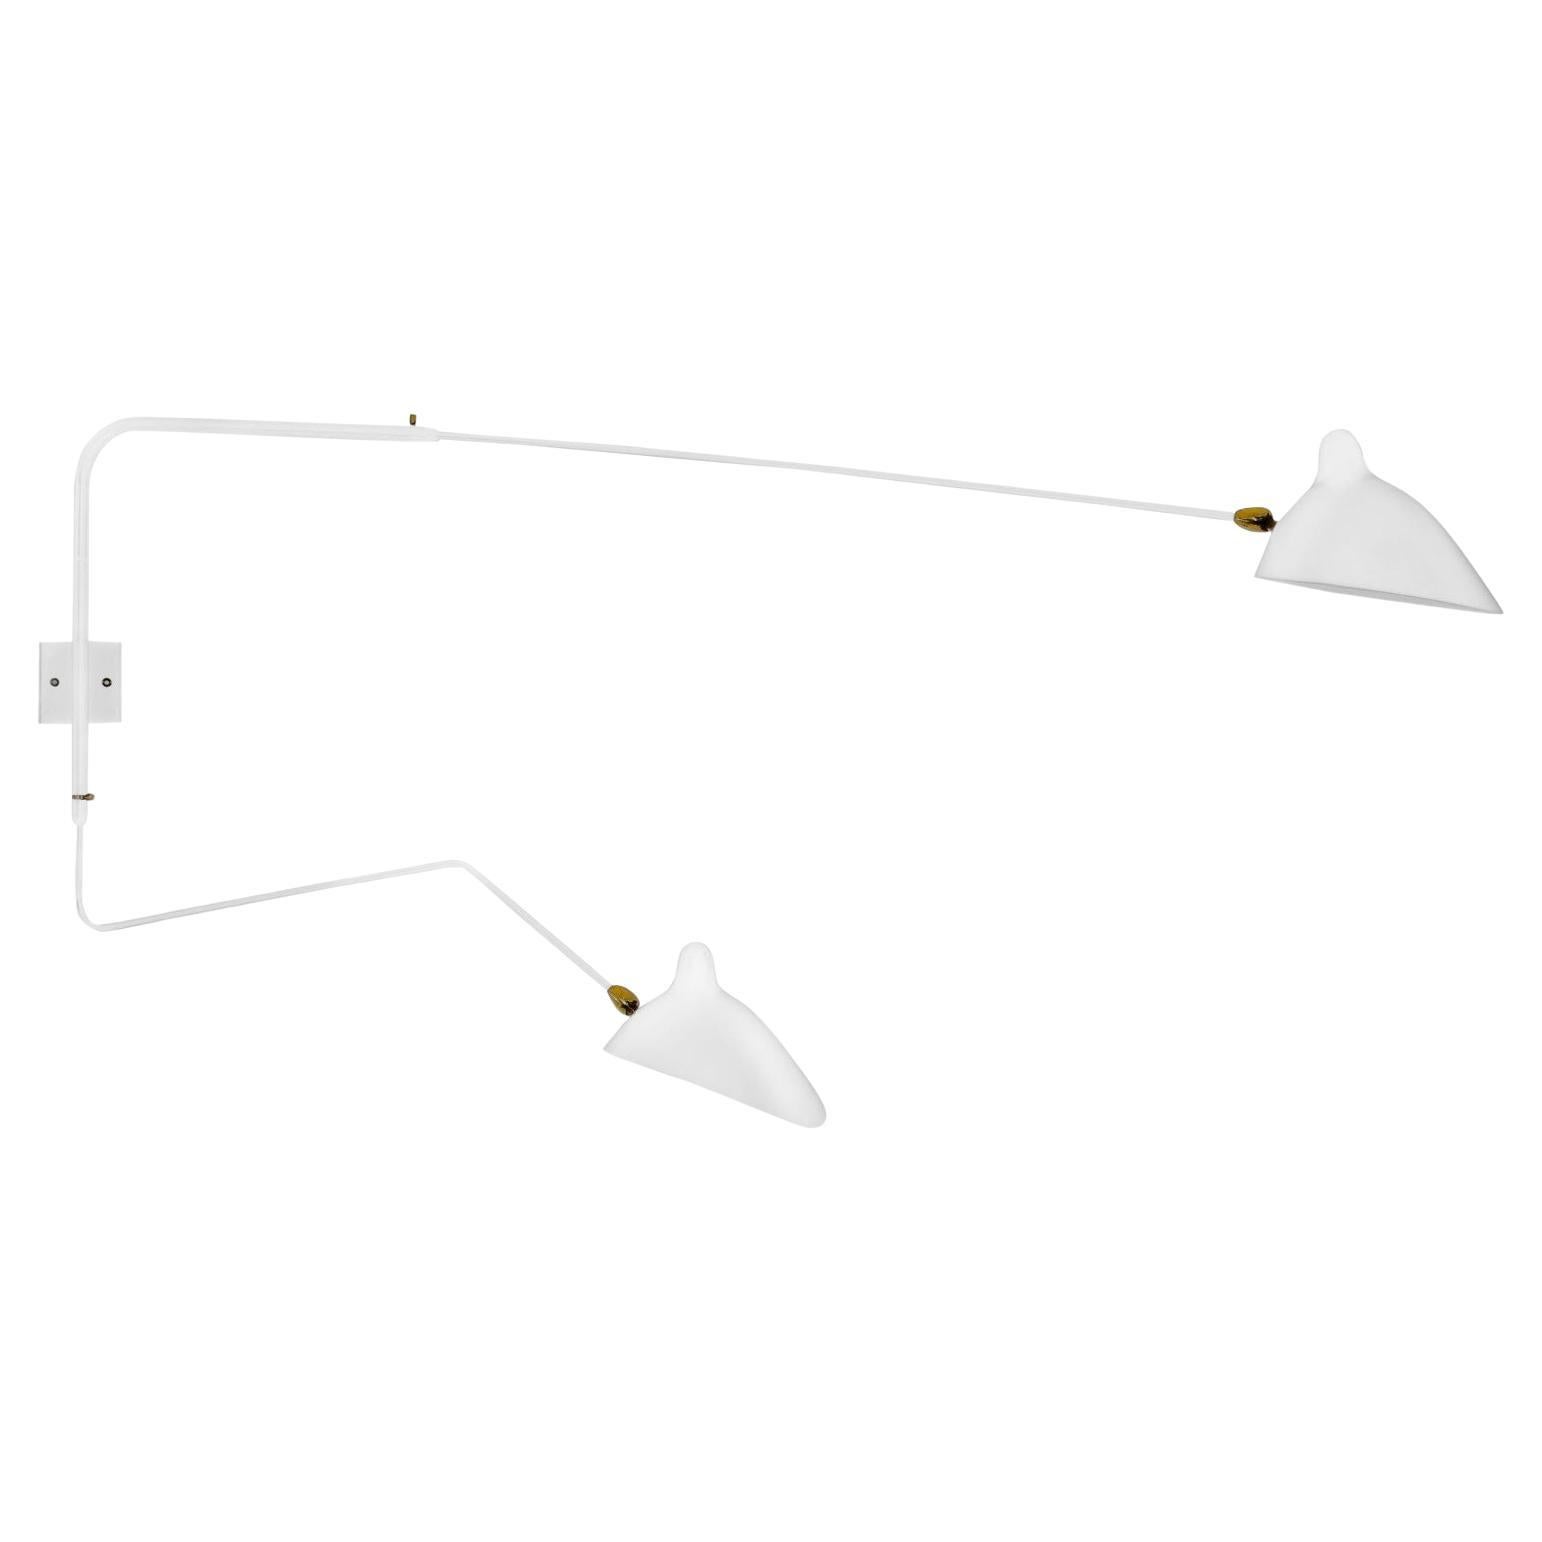 Serge Mouille - Rotating Sconce with 2 Arms (1 Curved) in White